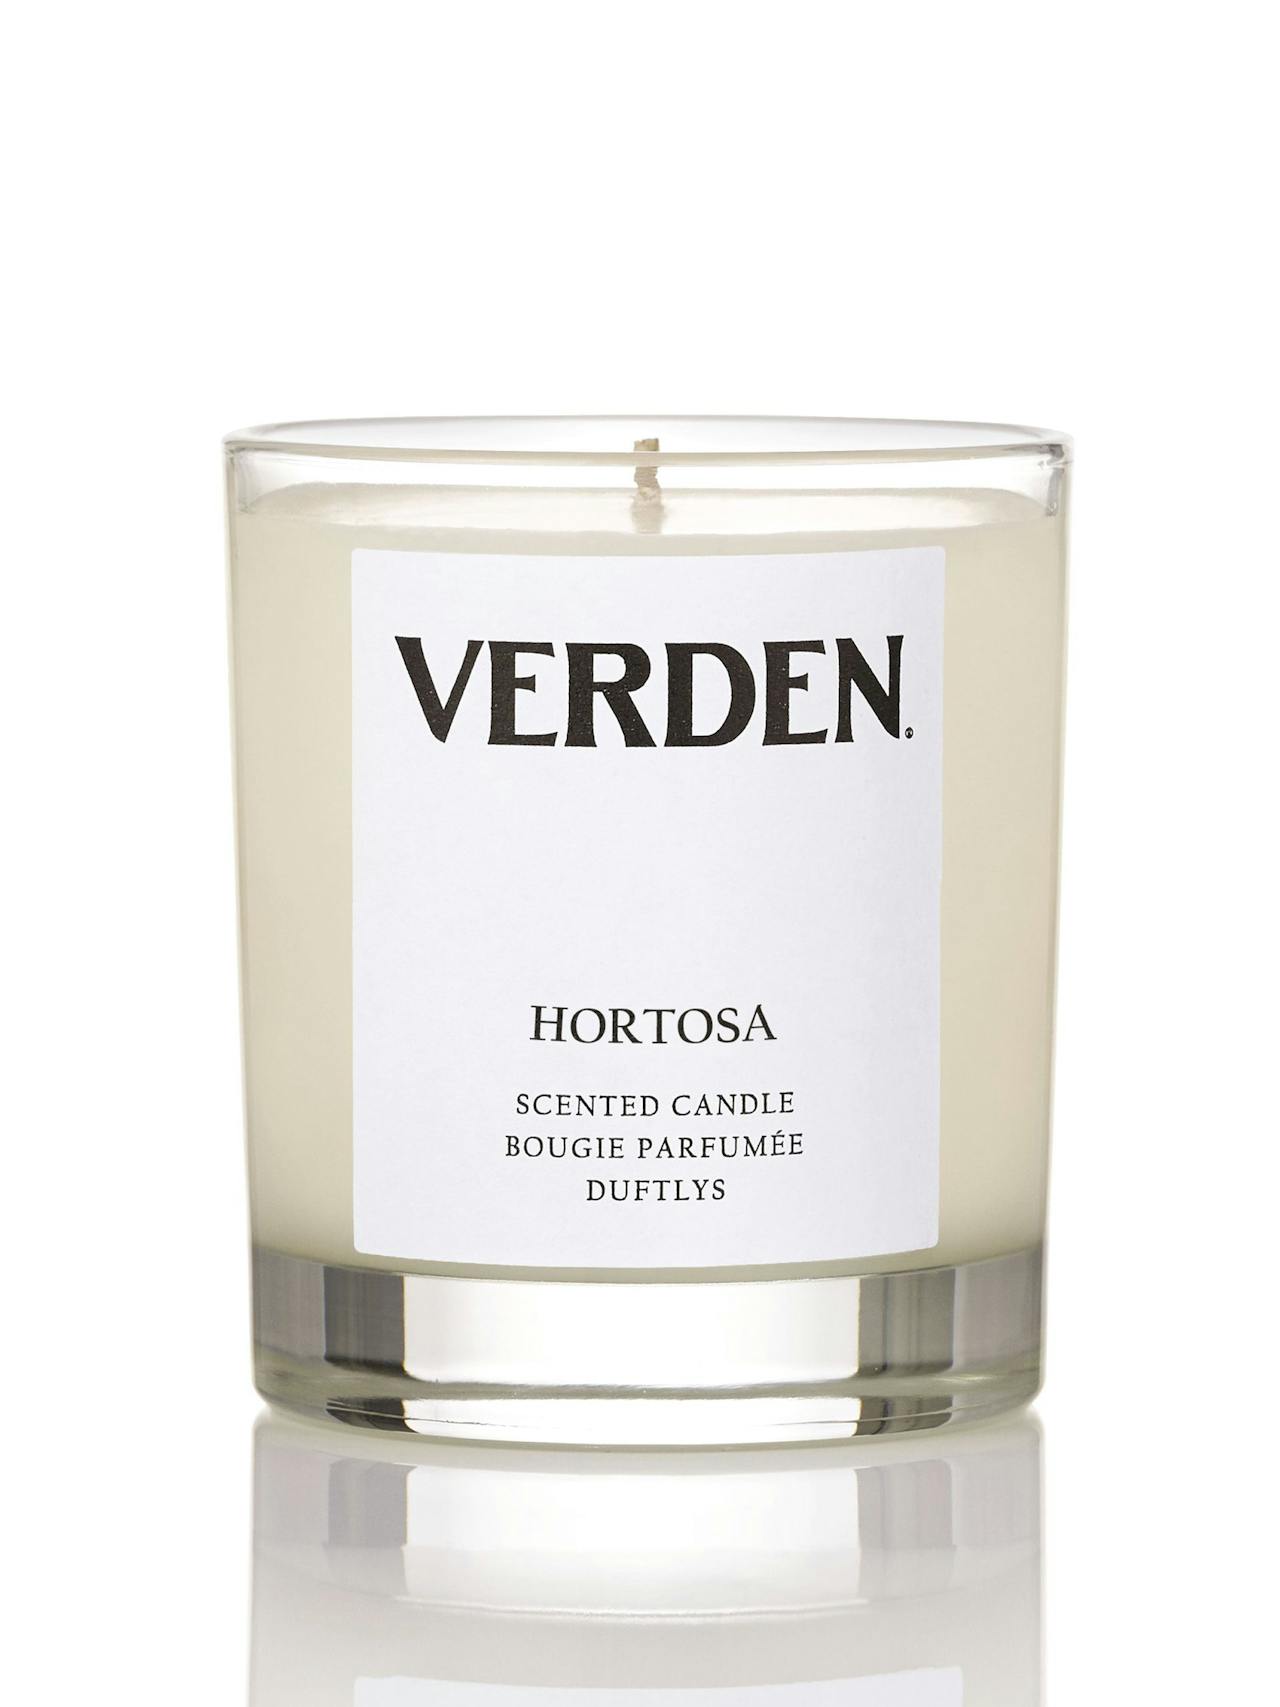 Hortosa scented candle